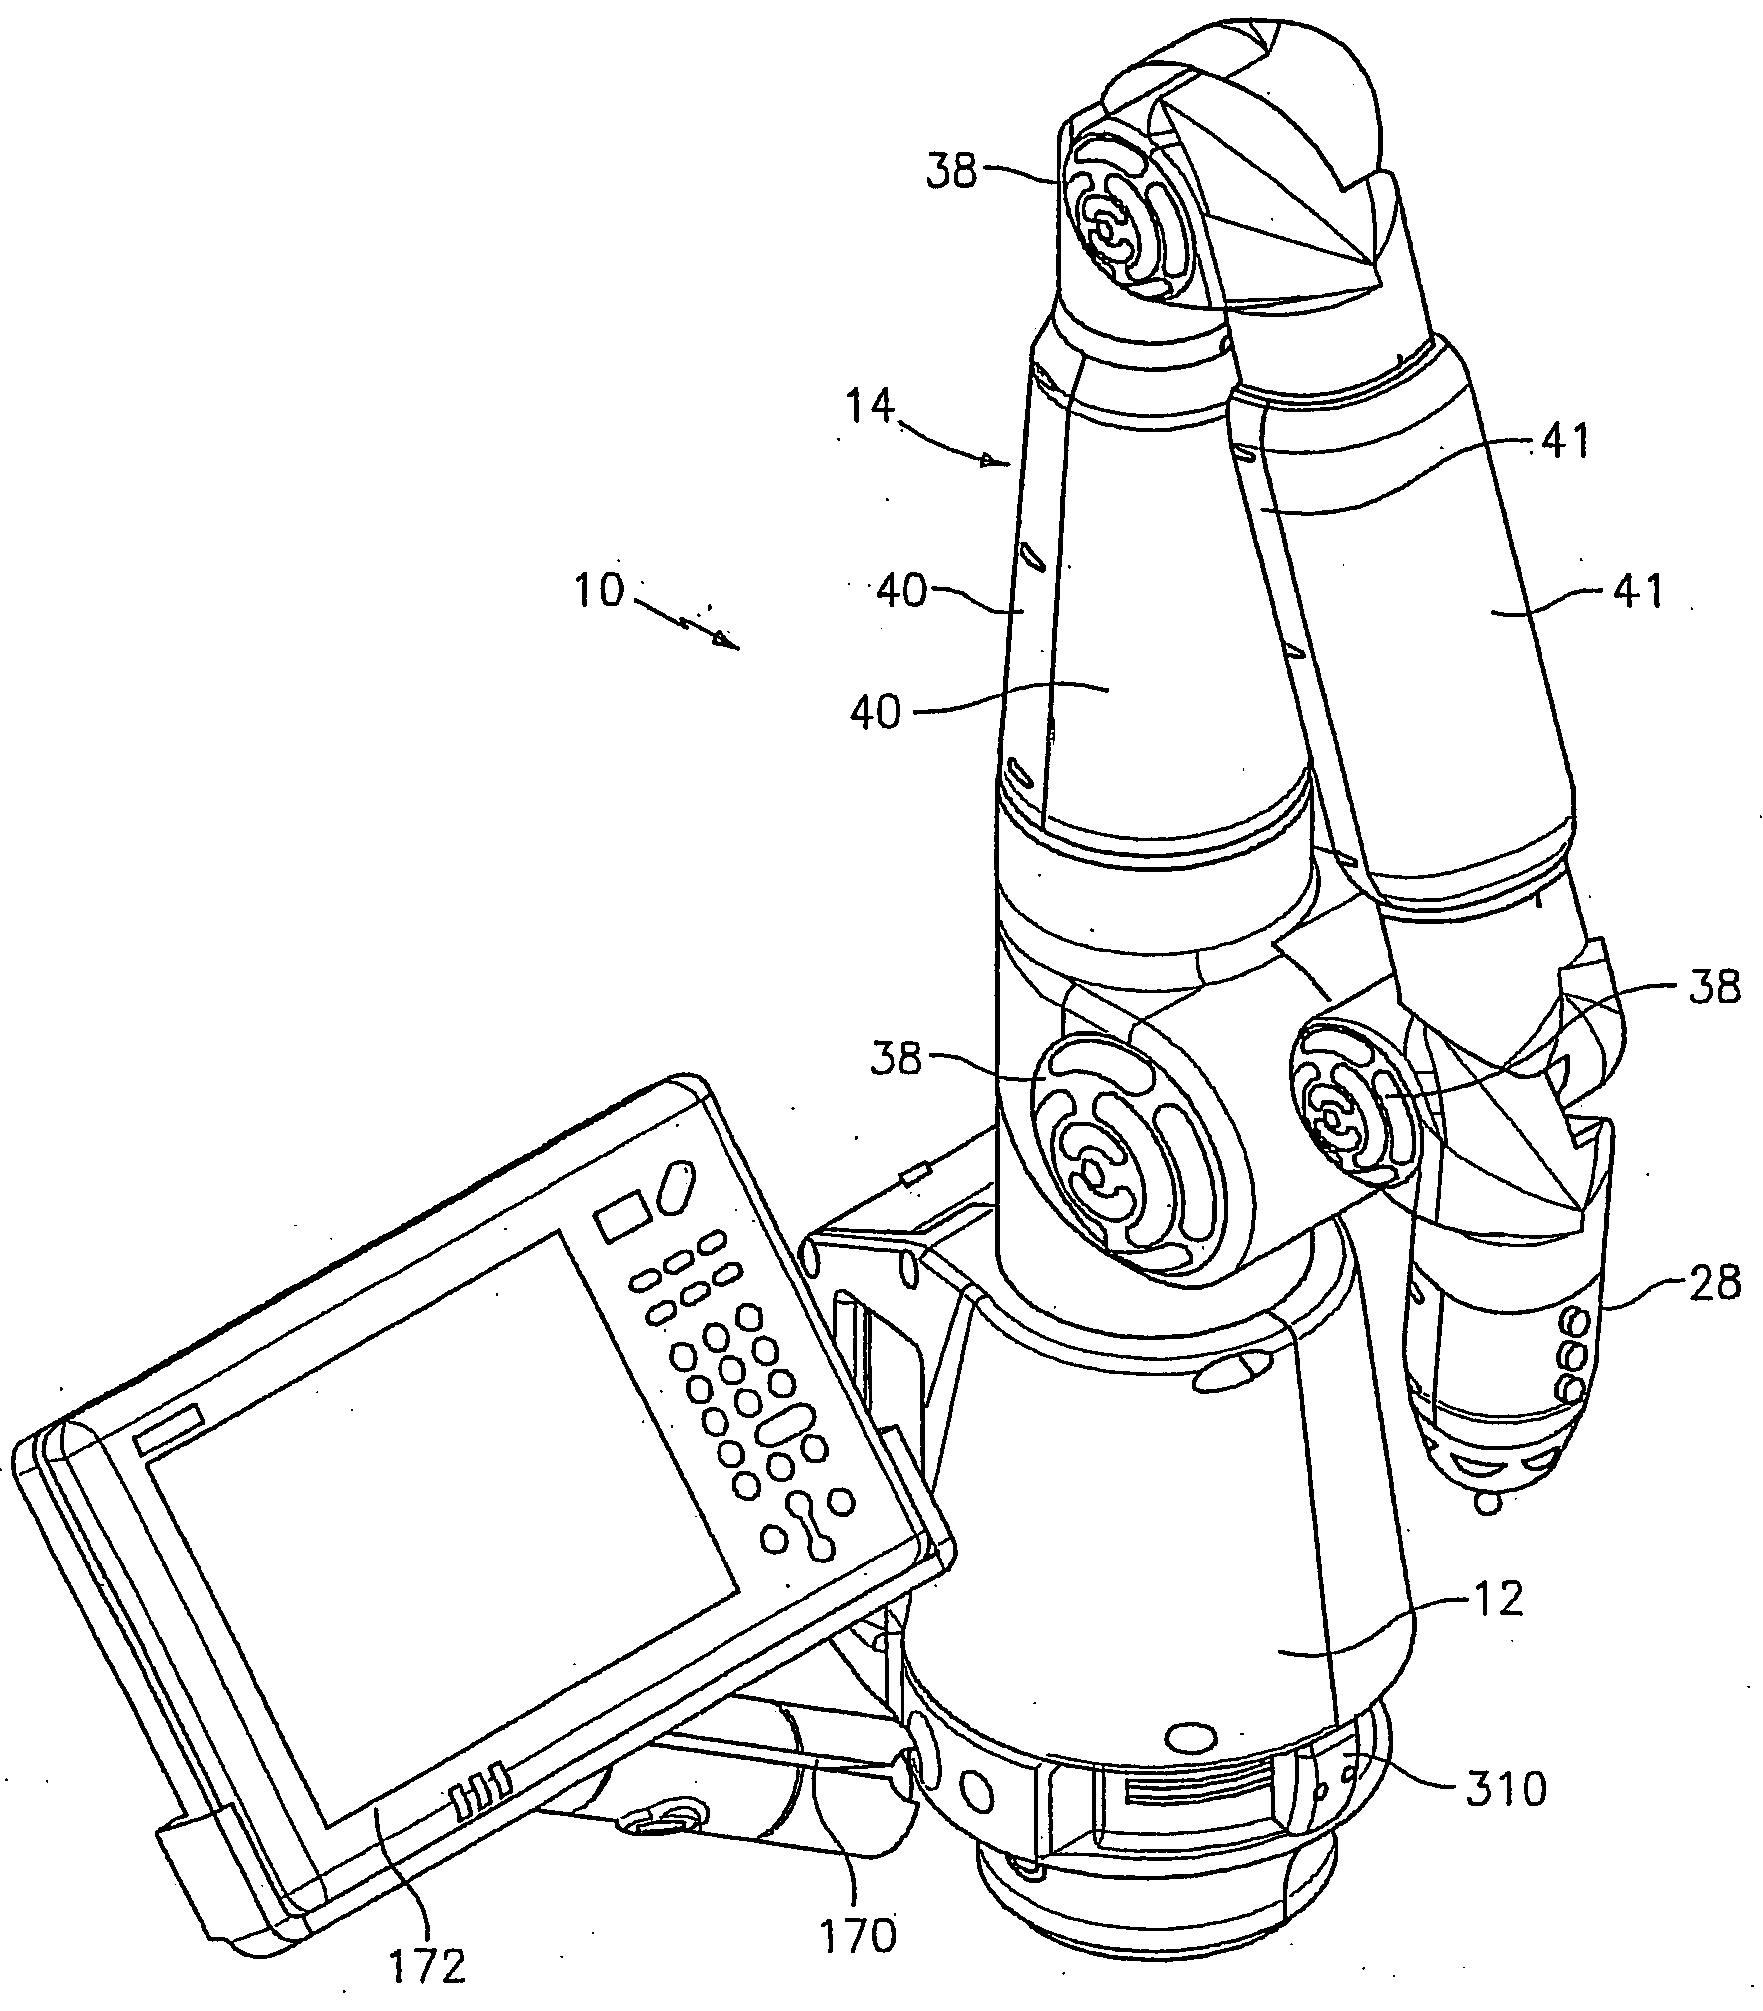 Method for improving measurement accuracy of a portable coordinate measurement machine